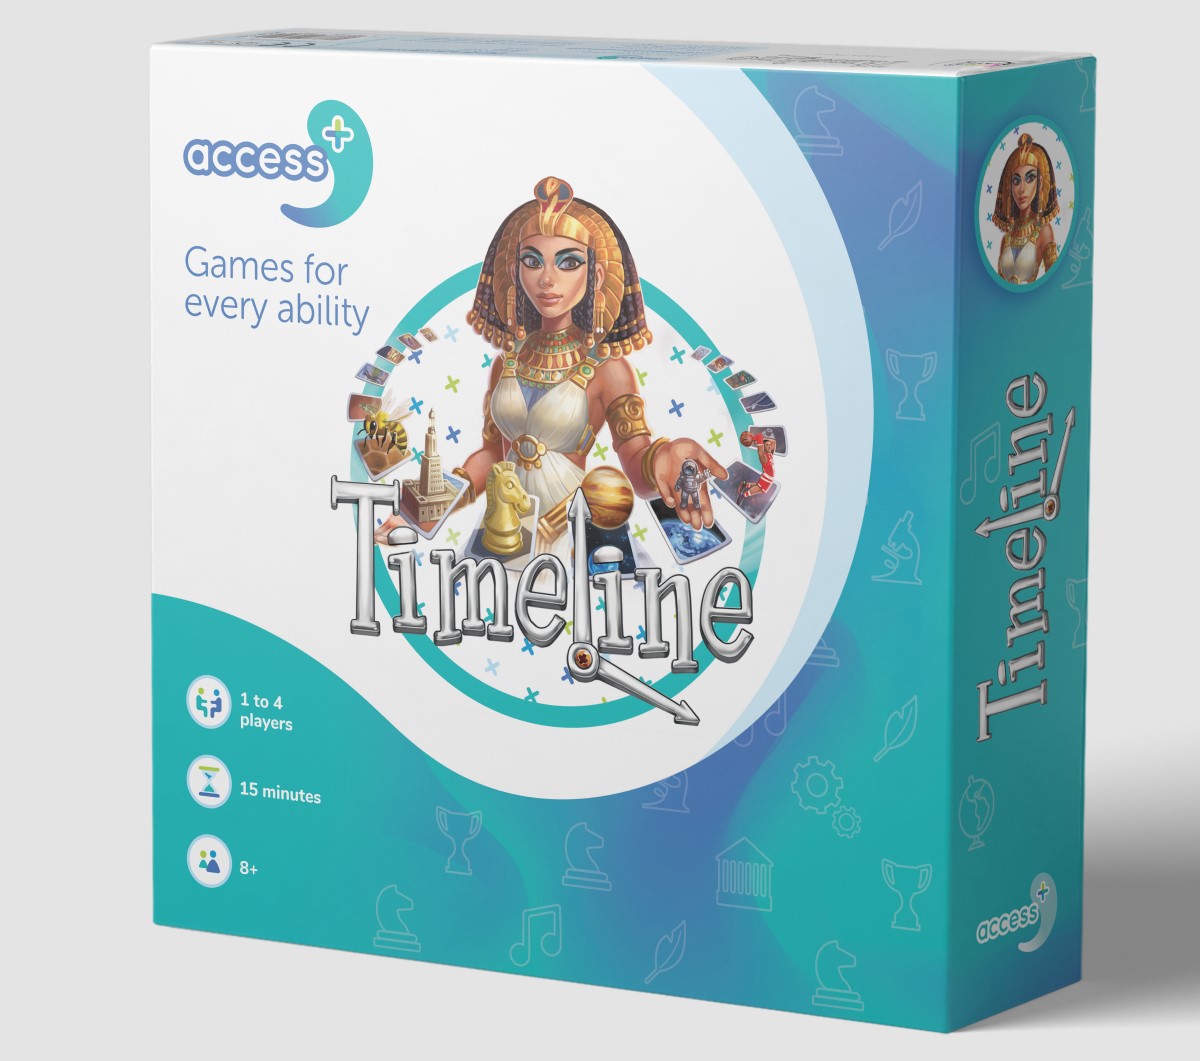 Box art for Timeline Access+ by Asmodee Publishing